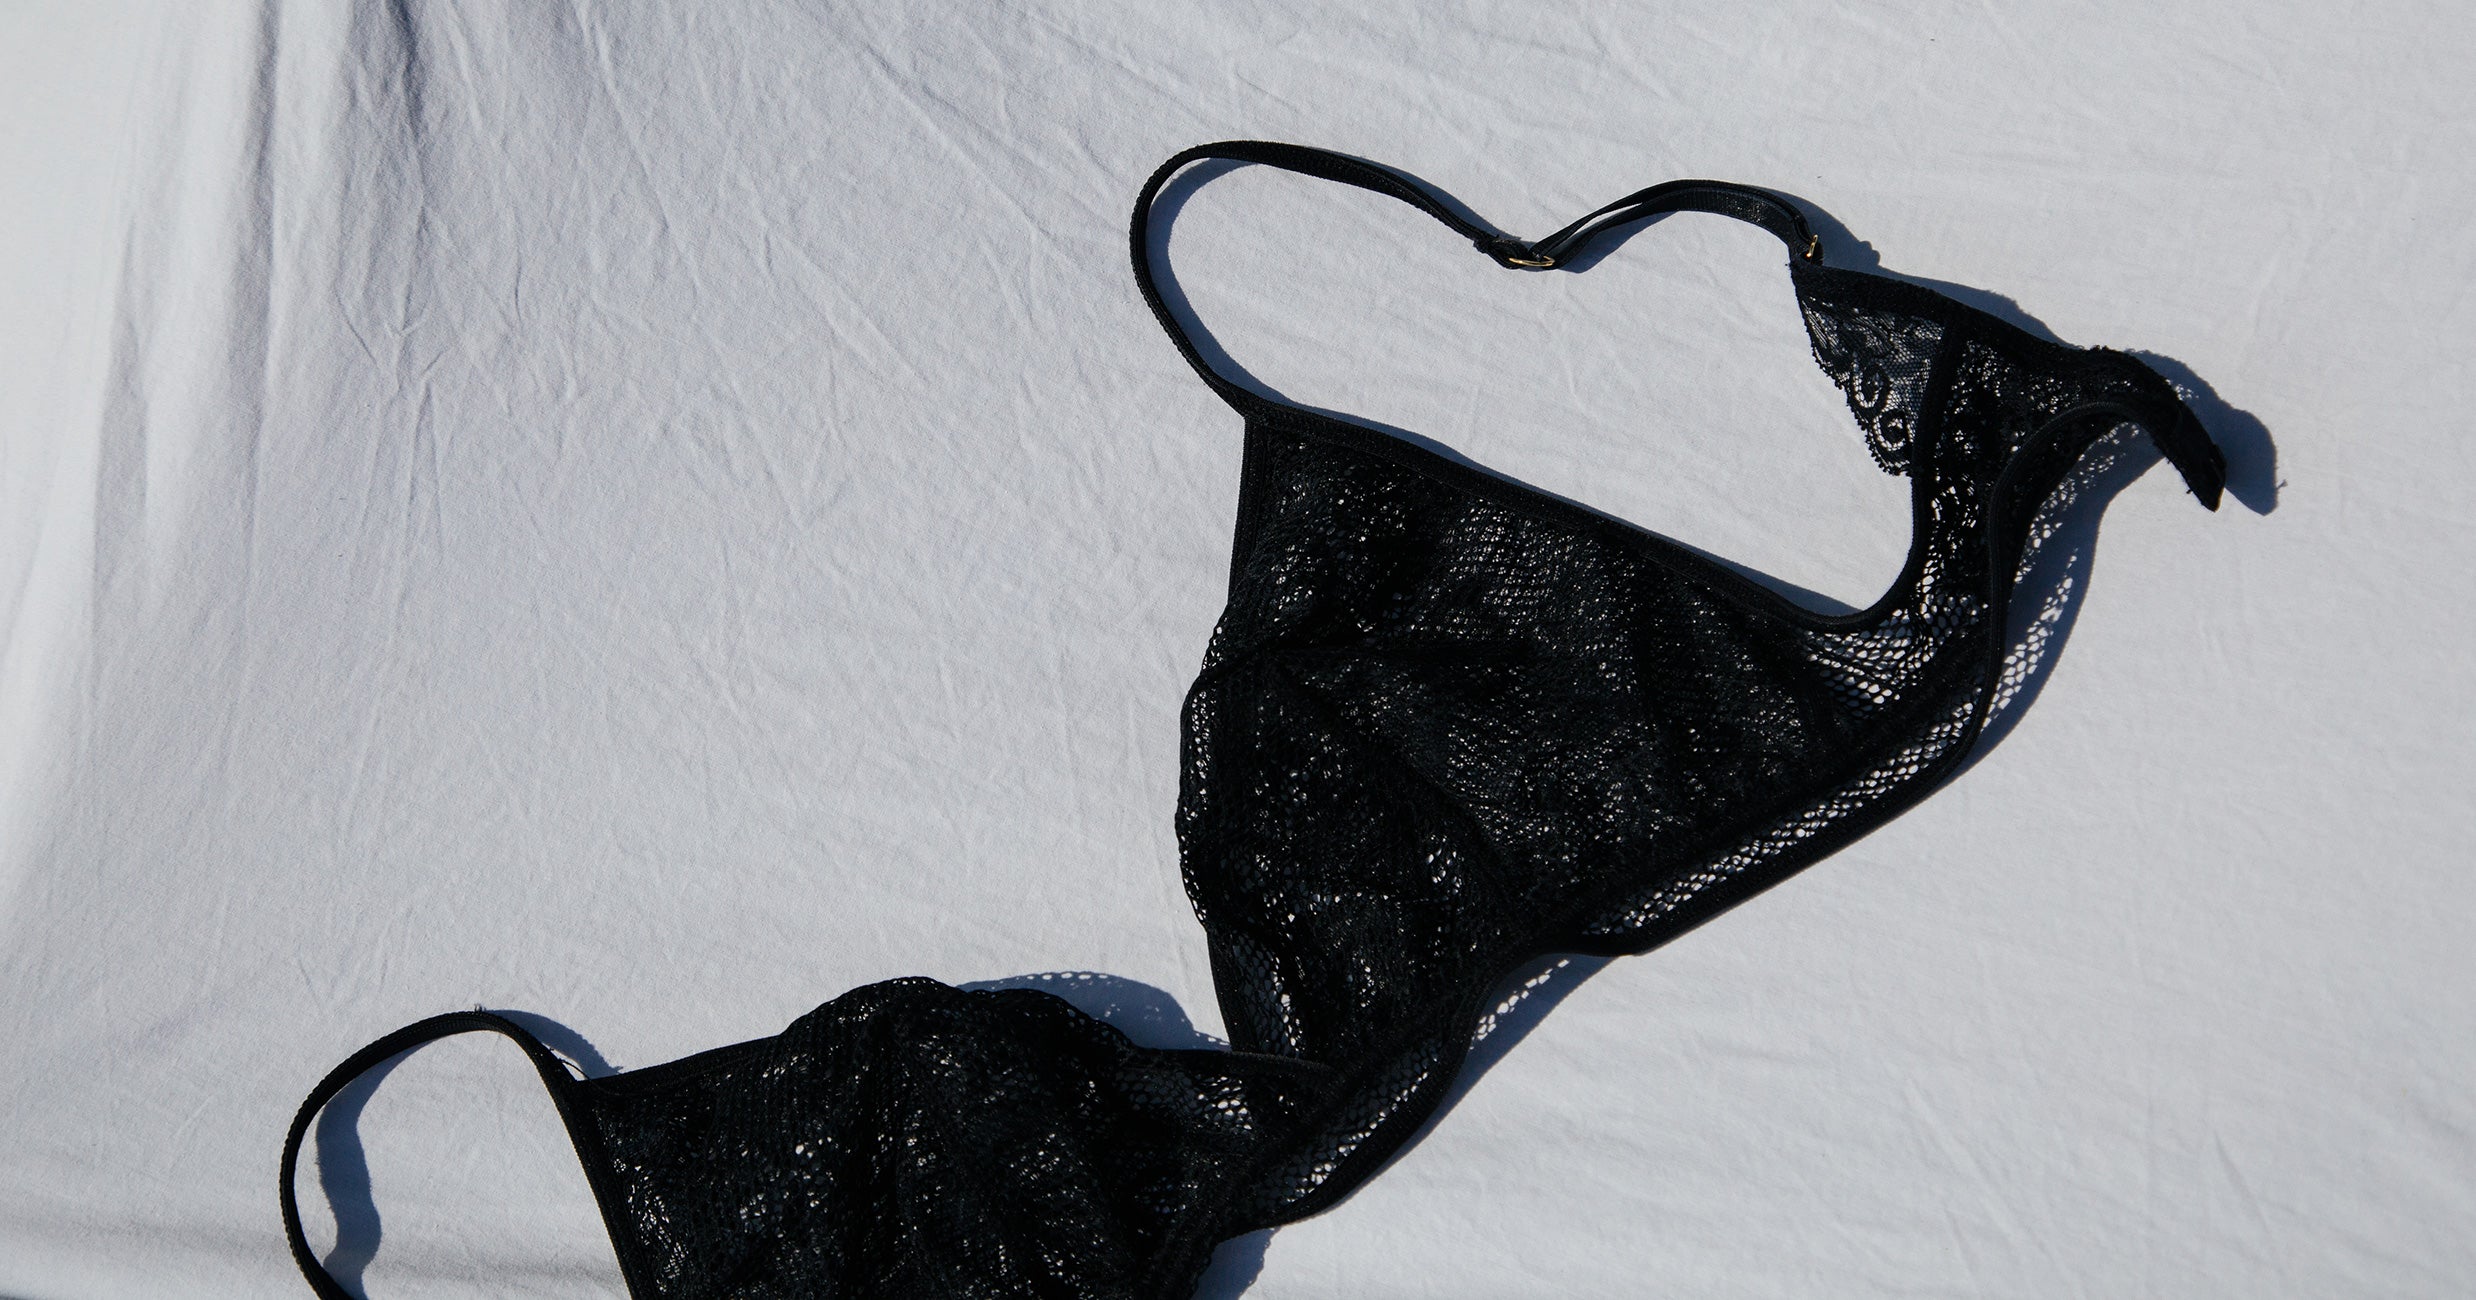 Why do panties have cute designs even if they are least likely to be seen?  - Quora